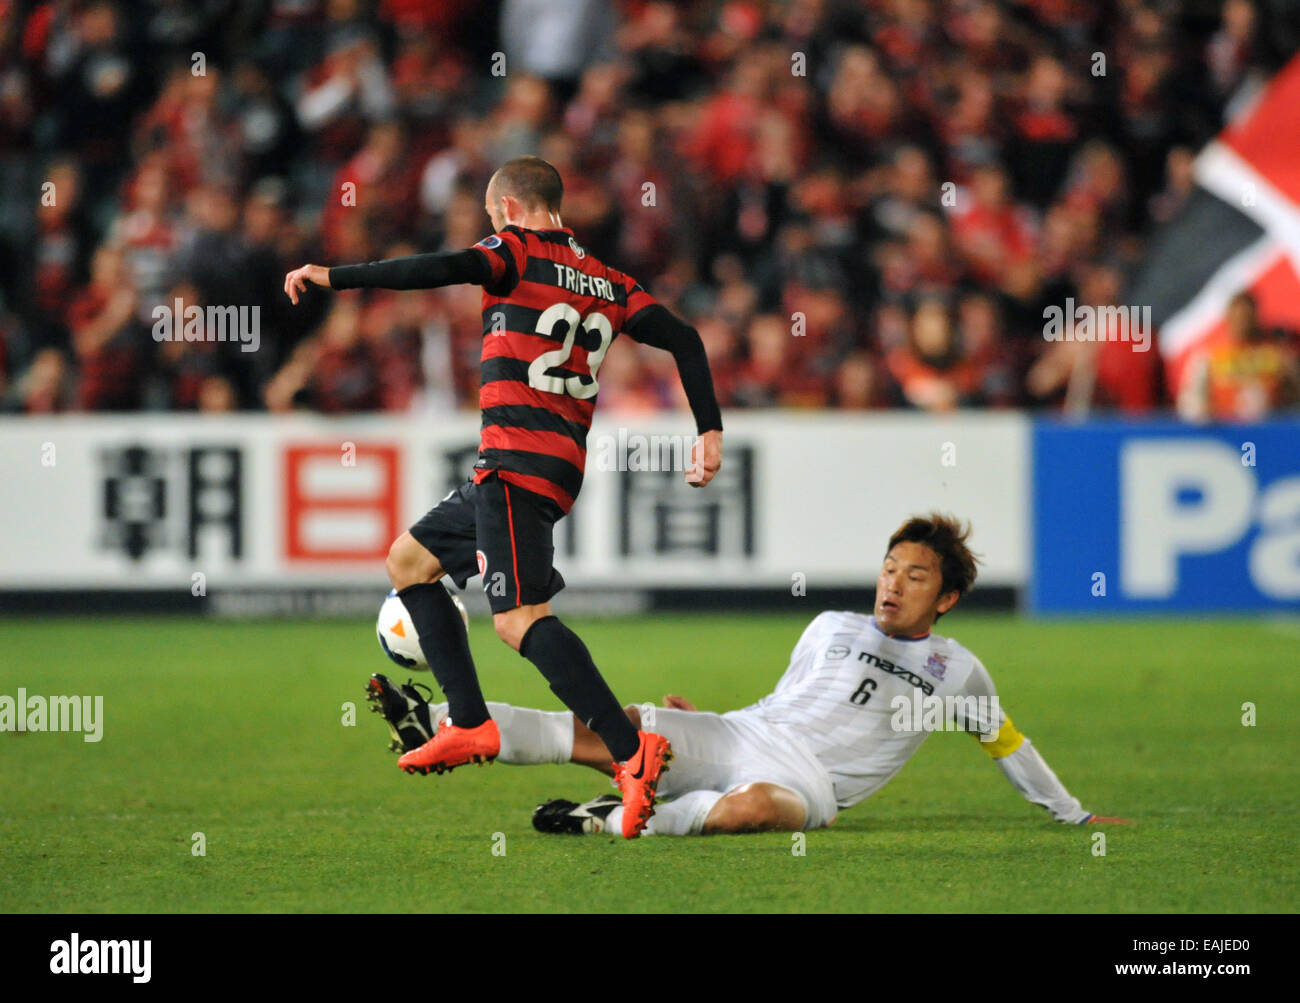 The Western Sydney Wanderers beat Sanfrecce Hiroshima 2-0 to overcome a 1-3 deficit after the first leg of the elimination round.  Featuring: Jason Trifiro Aoyama Toshihiro Where: Sydney, Australia When: 14 May 2014 Stock Photo